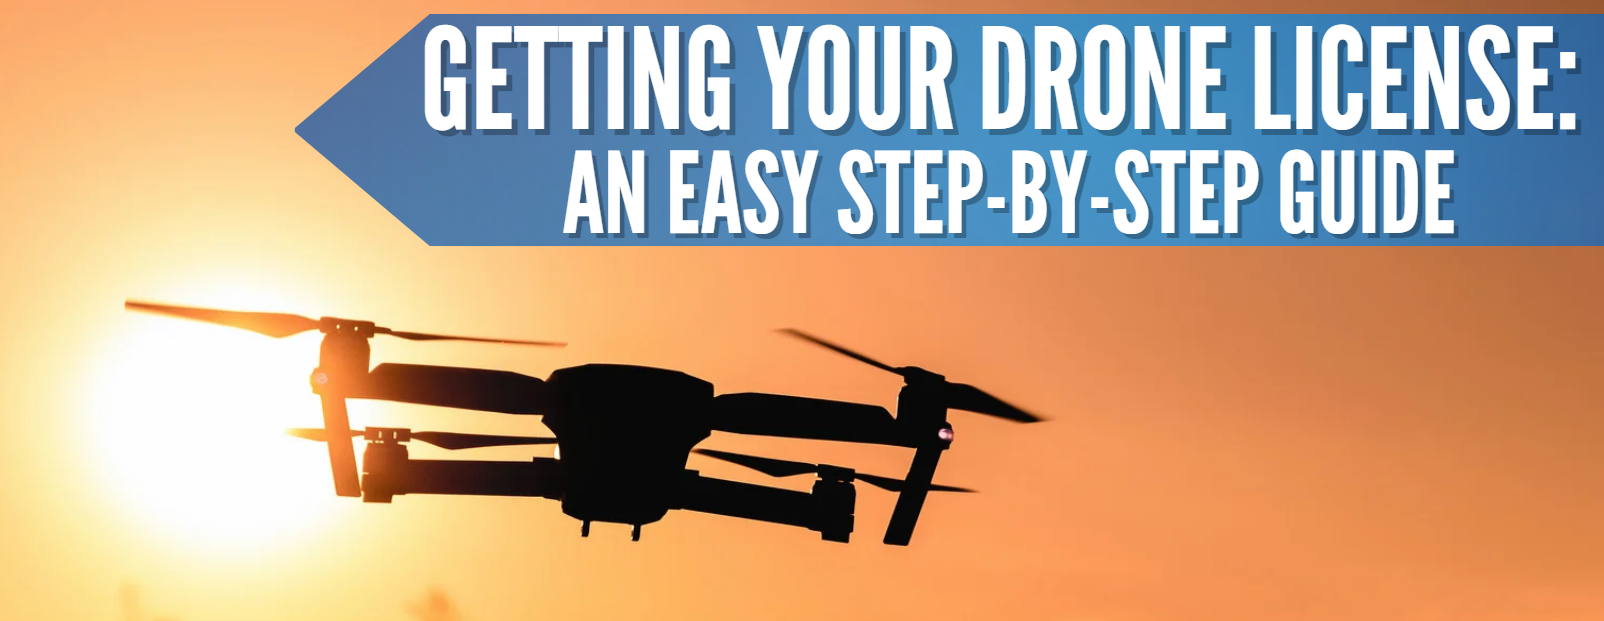 Getting Your Drone License: An Easy Step-by-Step Guide